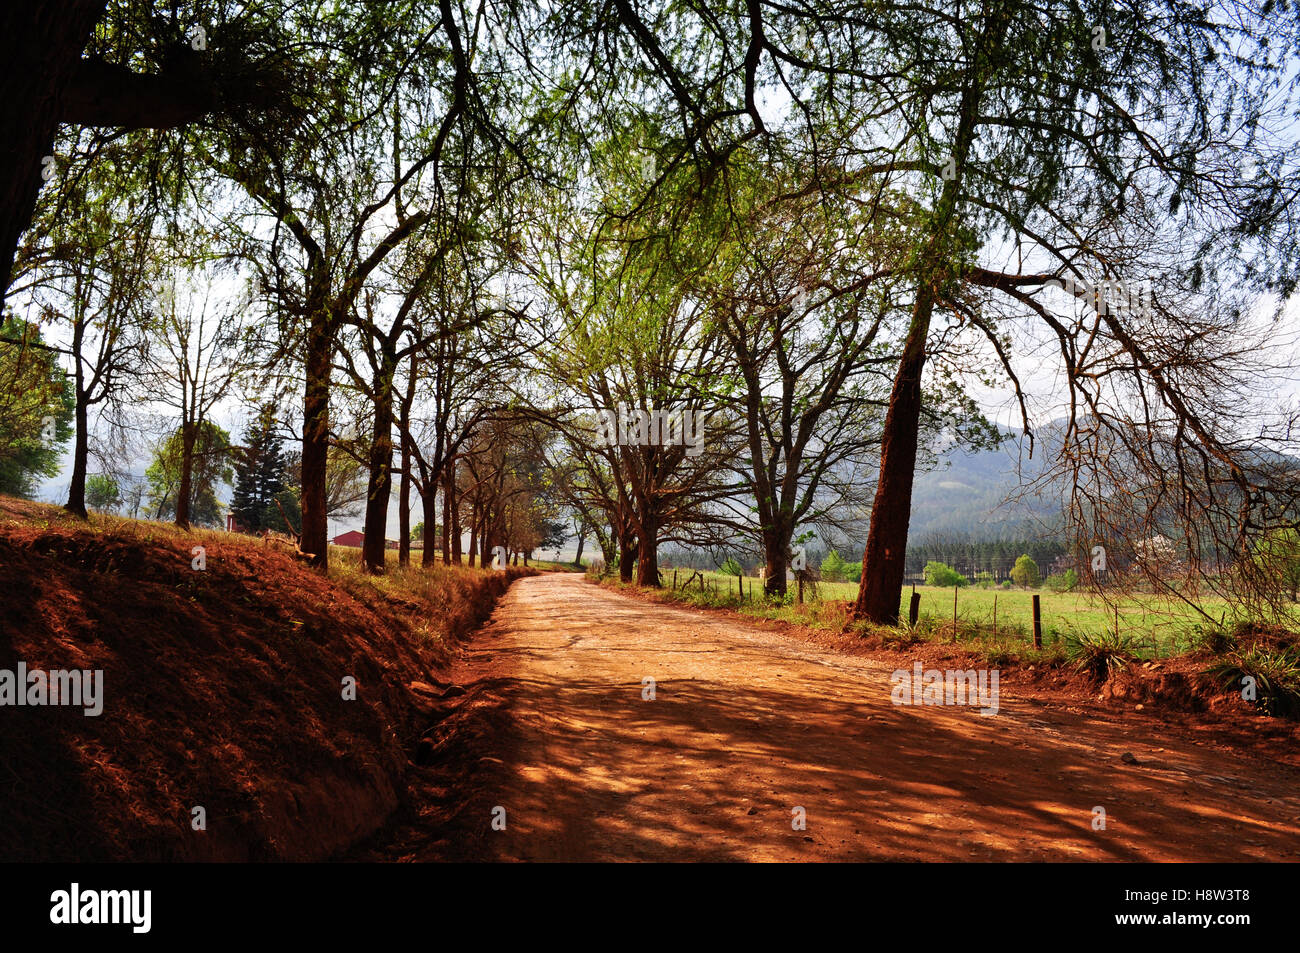 South Africa: the dirt road of red soil and trees which leads to Lone Creek Falls, a waterfall near the town of Sabie Stock Photo